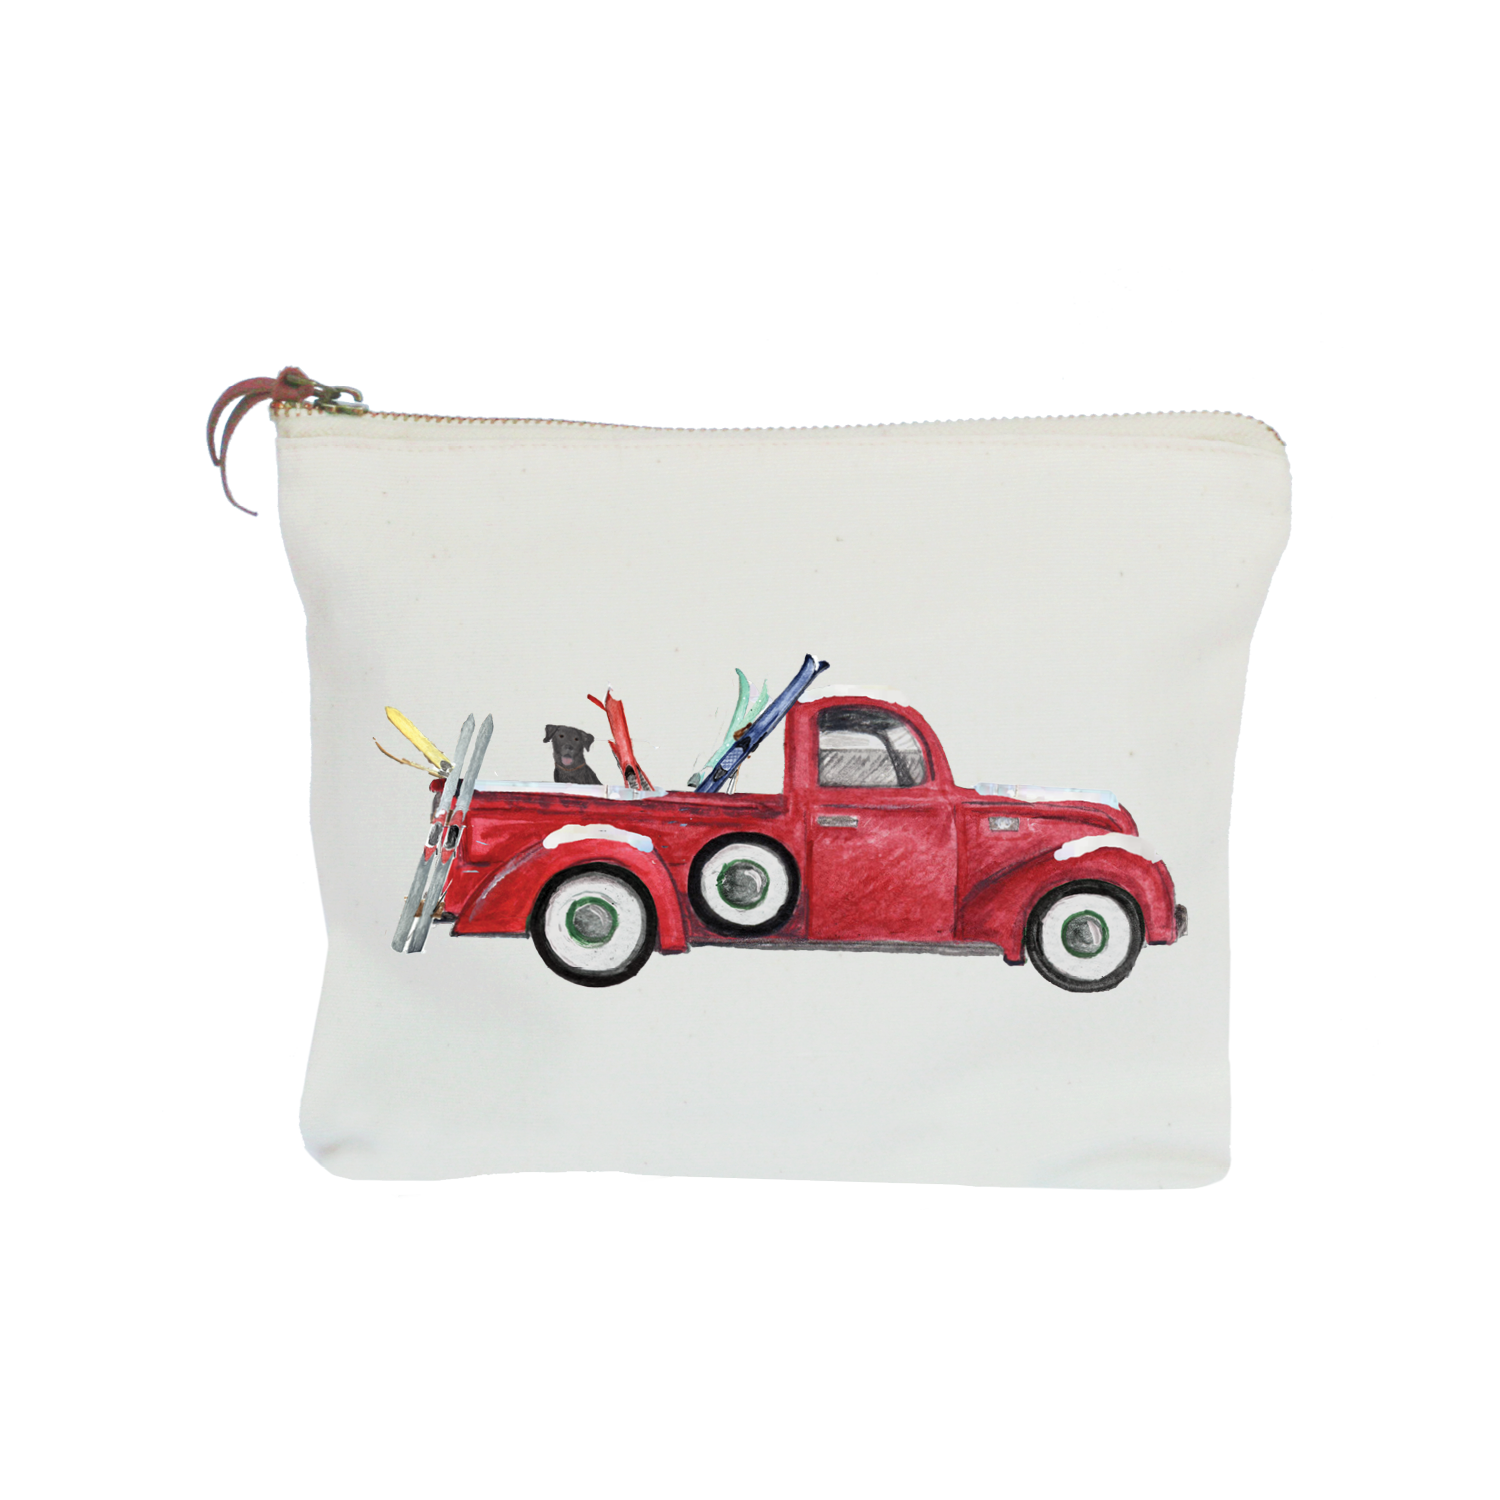 red truck with skis zipper pouch